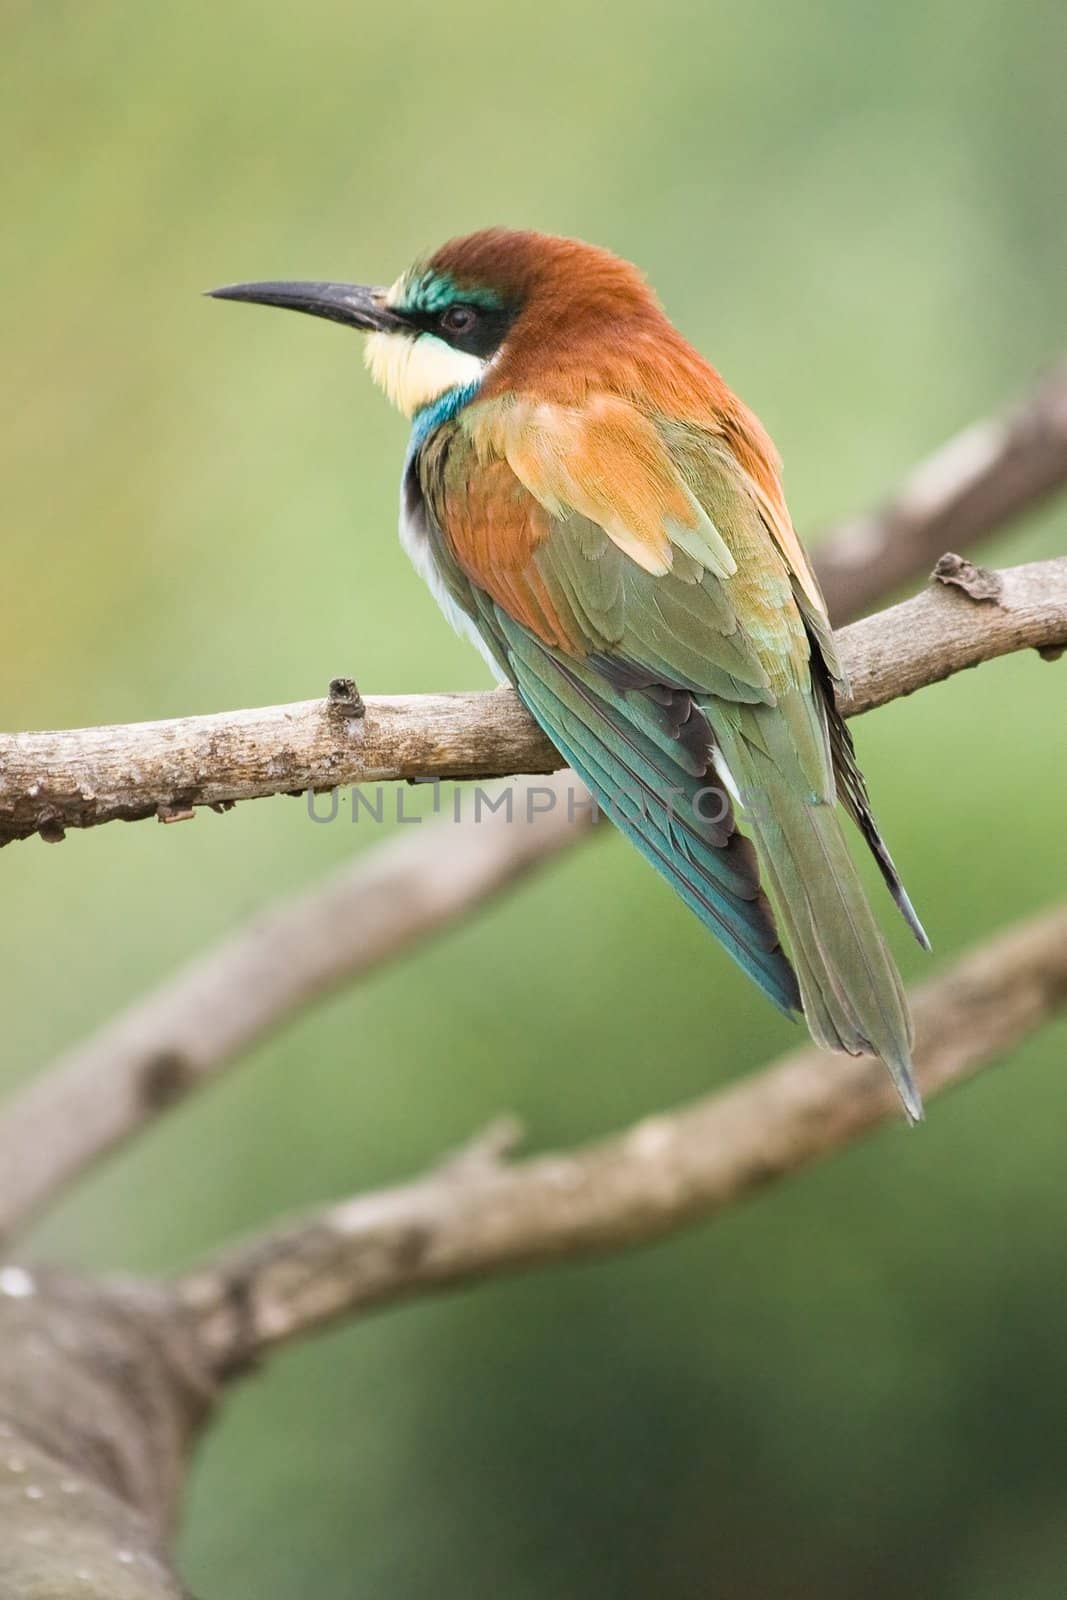 European Bee-eater by Colette